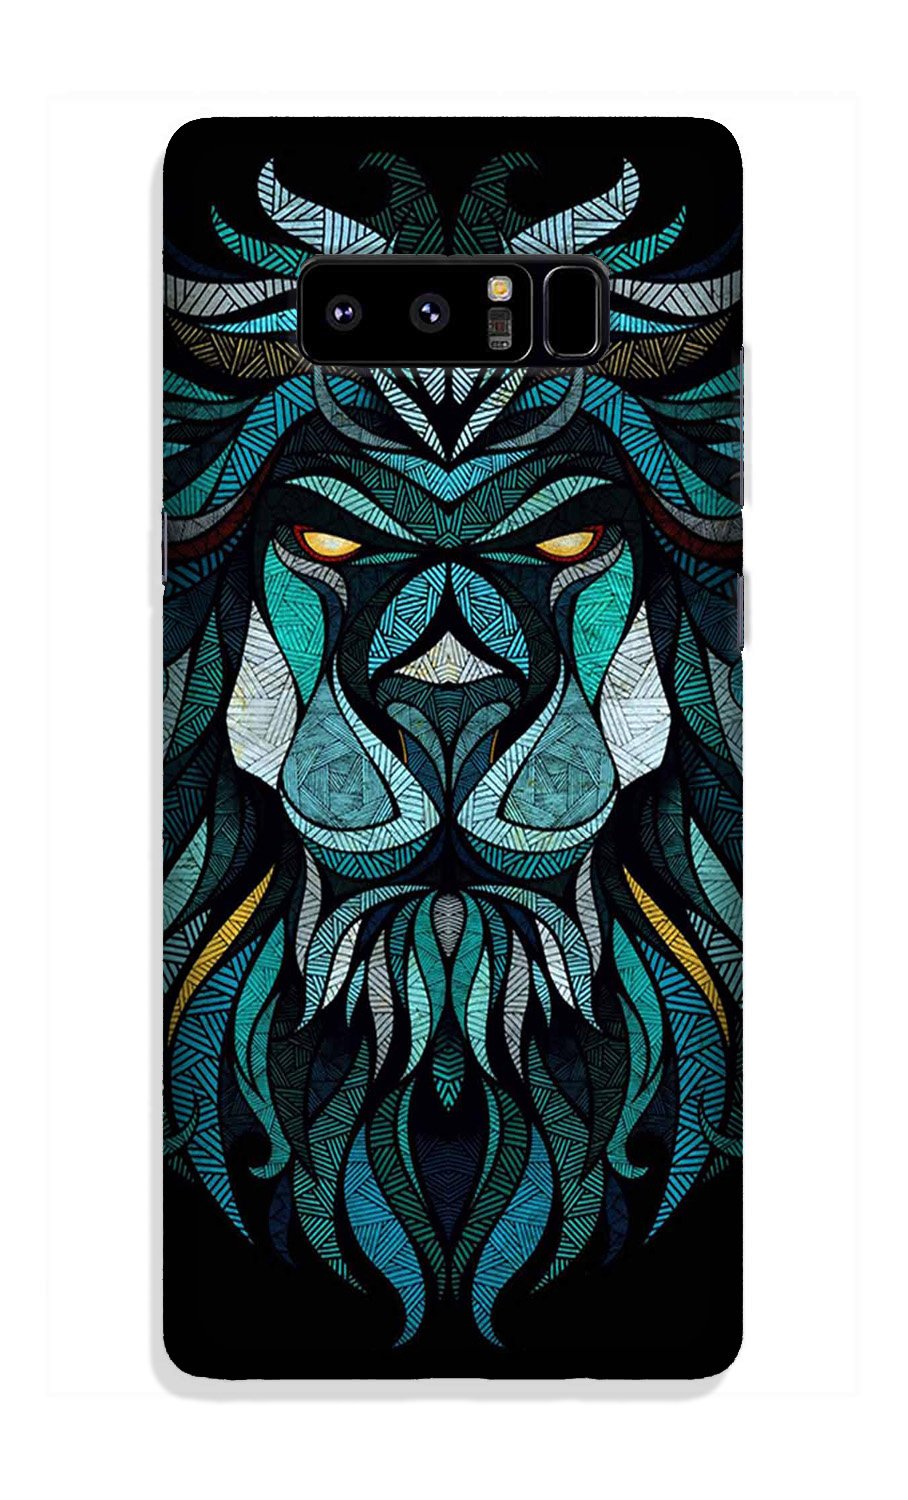 Lion Mobile Back Case for Galaxy Note 8 (Design - 314)